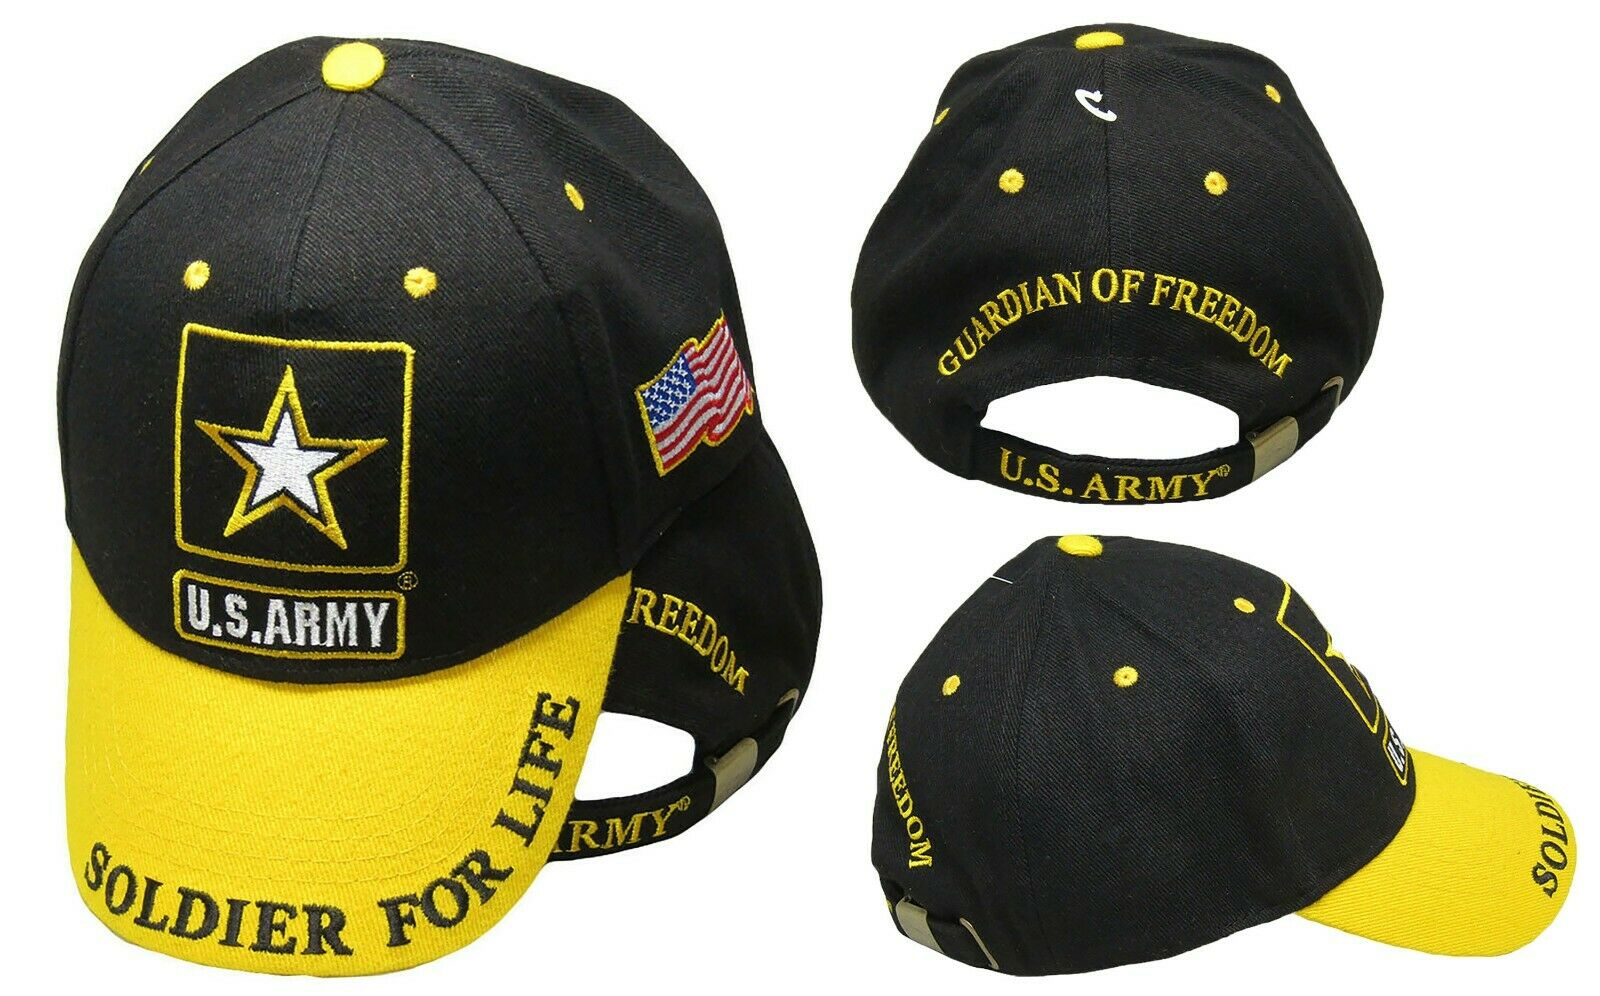 US Army Star Soldier For Life Guardian of Freedom Black Yellow 3D Cap Hat